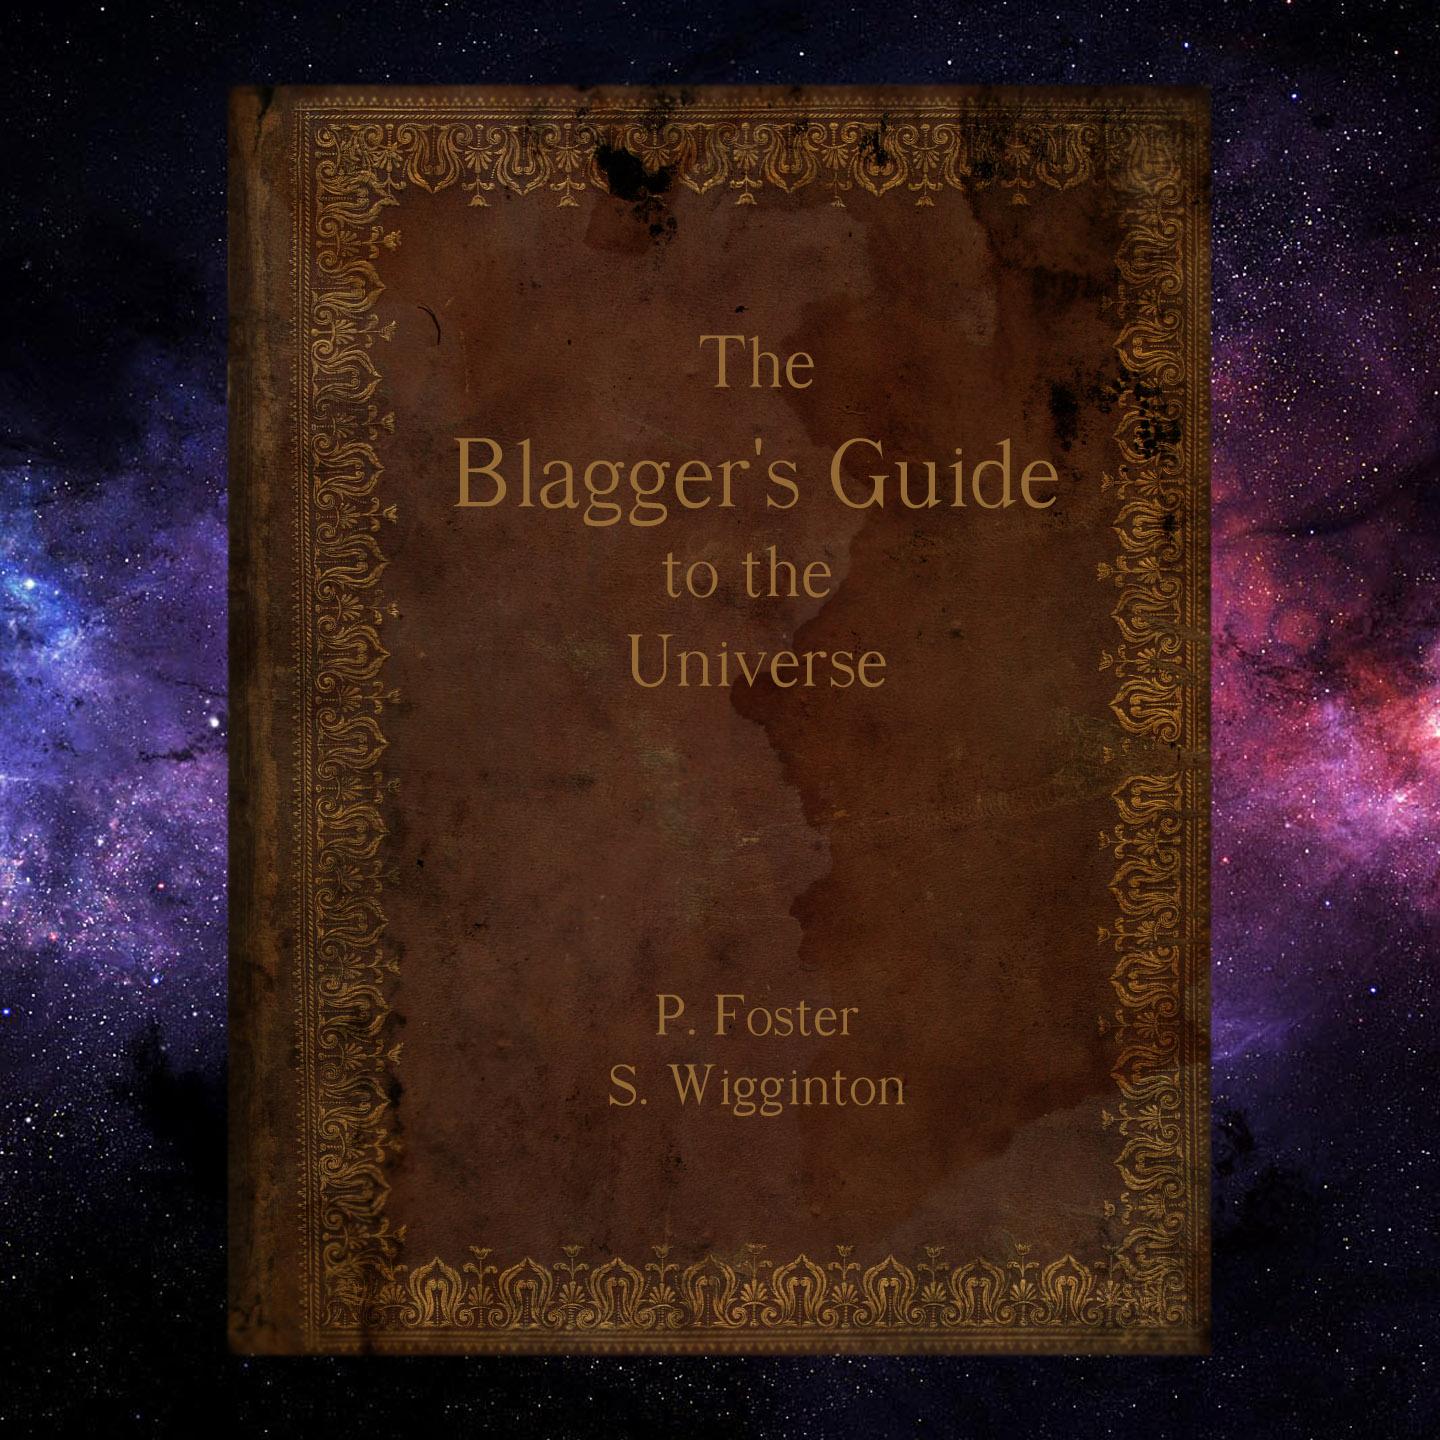 The Blagger's Guide to the Universe